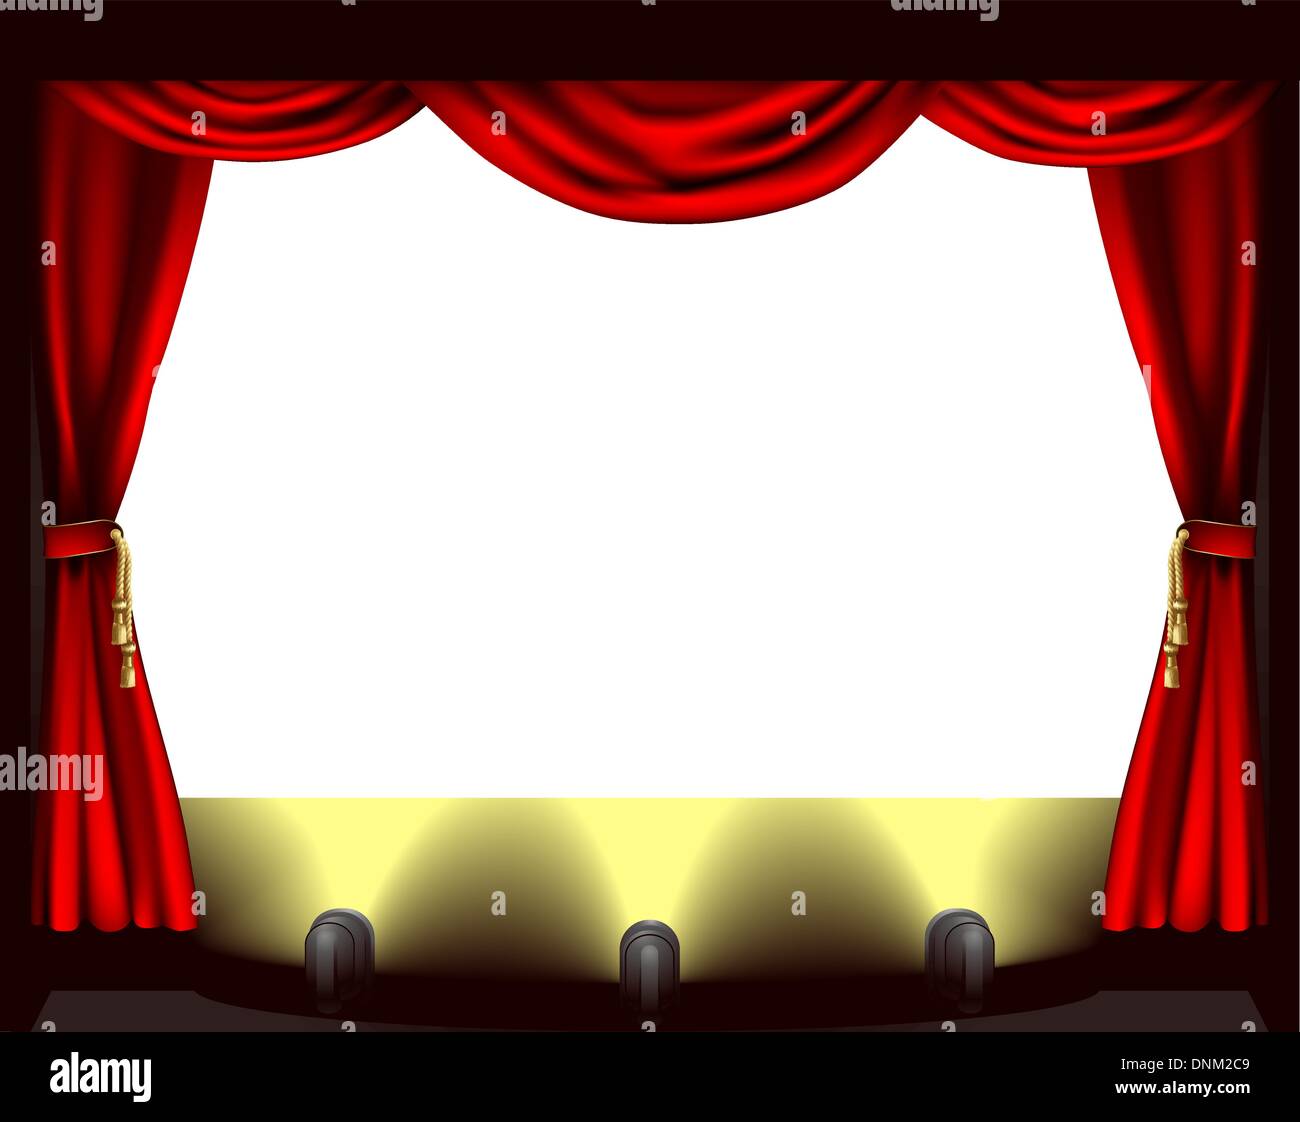 A theatre stage, lights and curtain illustration Stock Vector